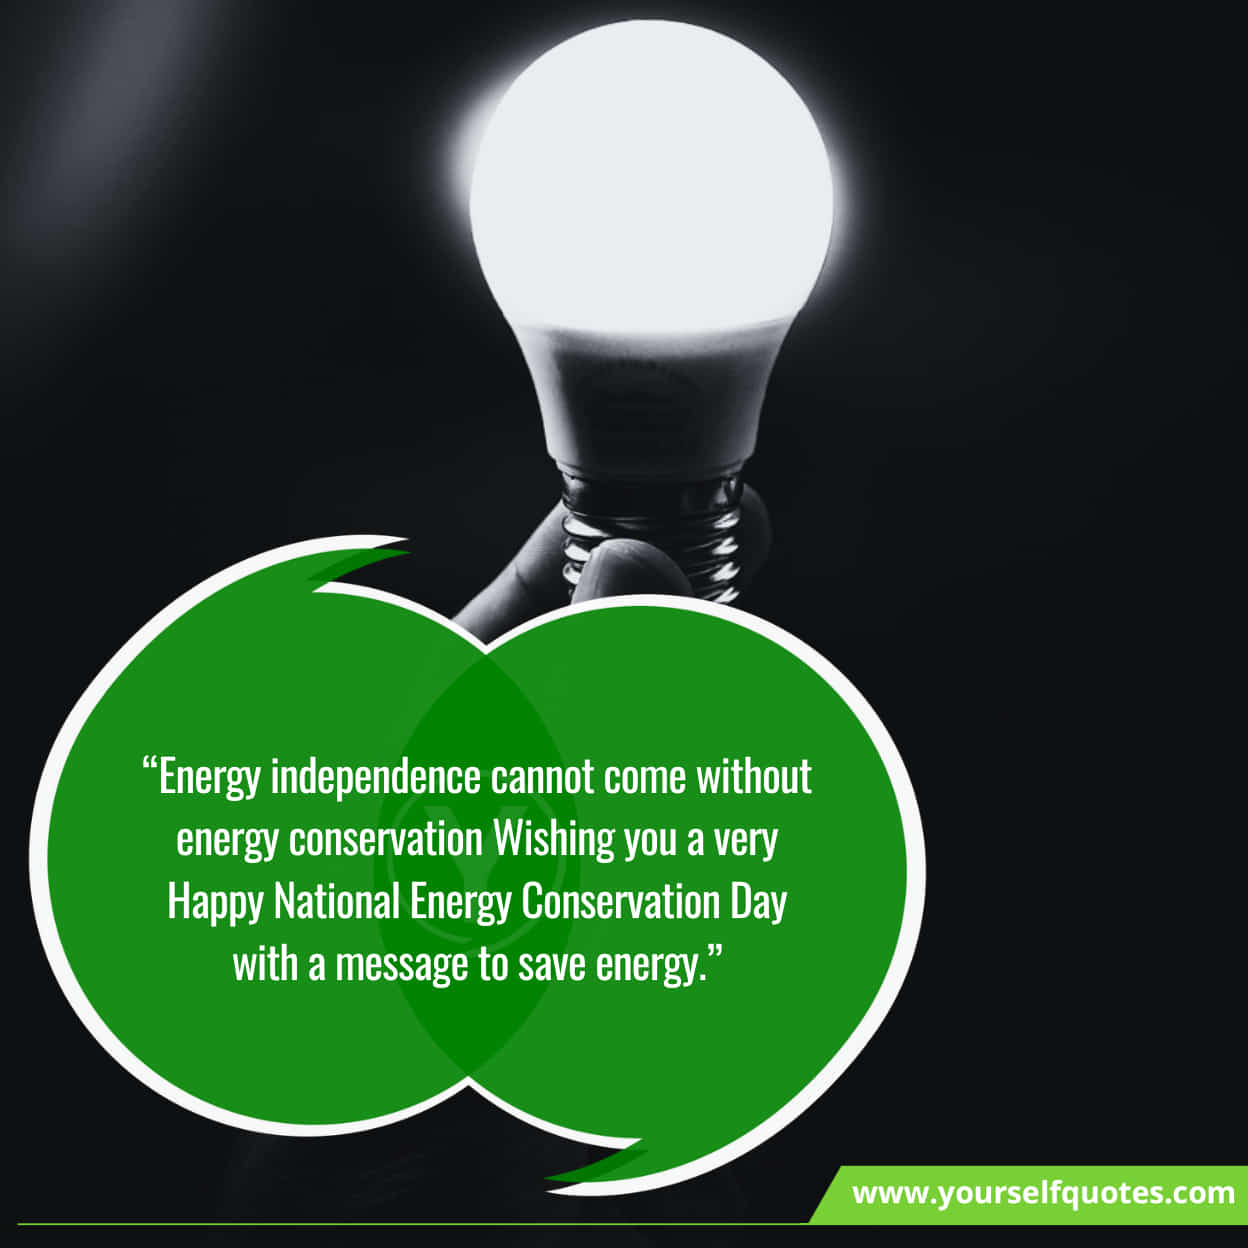 National Energy Conservation Day Messages